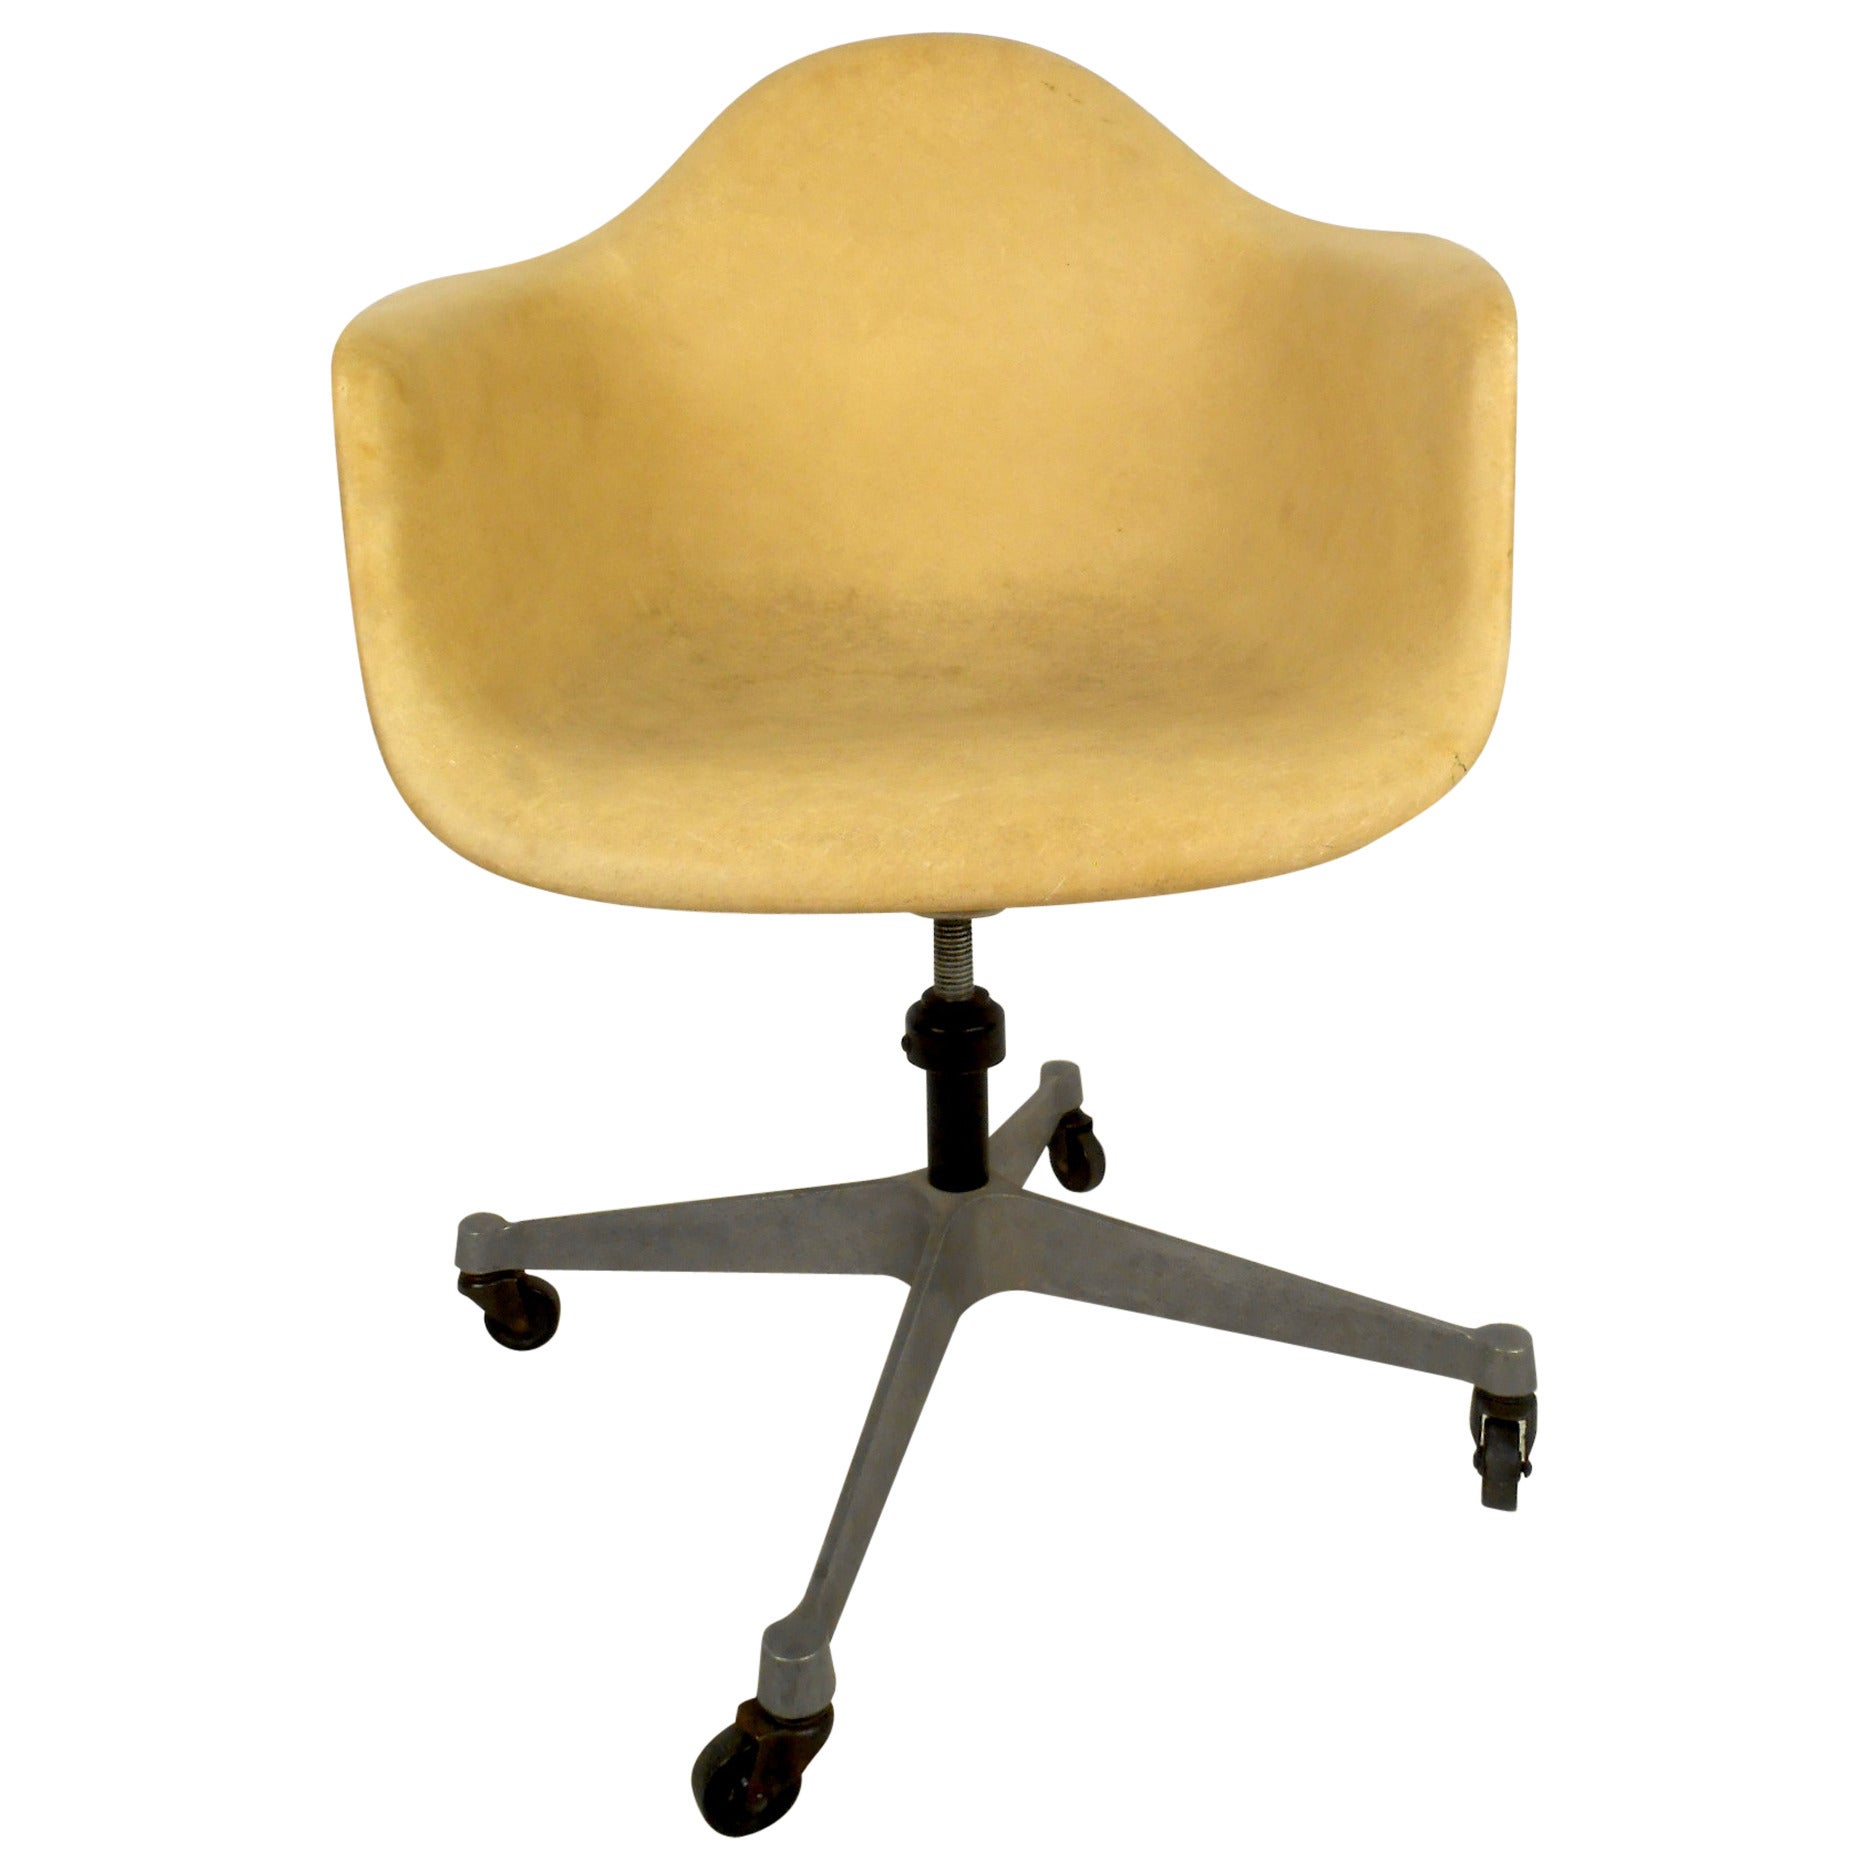 Mid-Century Modern Fiberglass Shell Chair with Wheels by Herman Miller